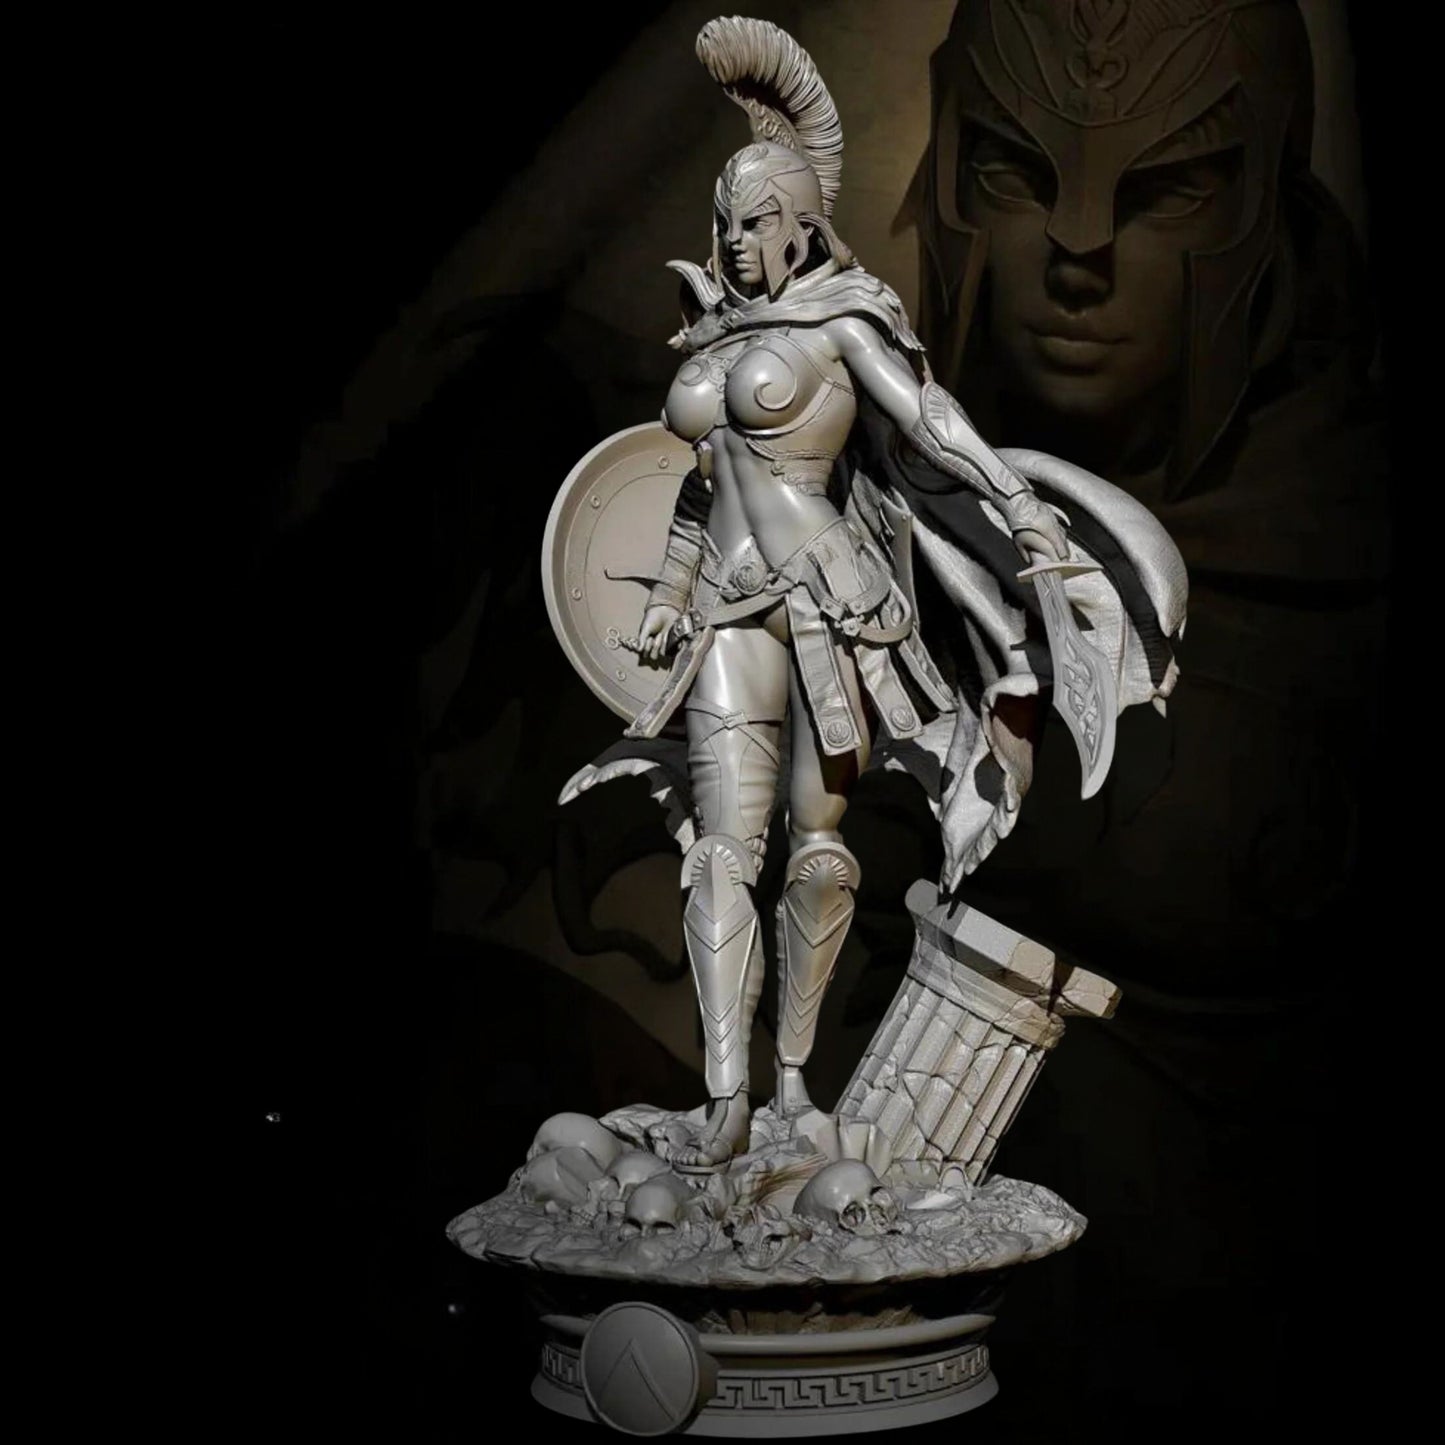 18+ Collector's 3D Printed Model: 1/24 Resin model kits DIY figure toy beauty self-assembled.